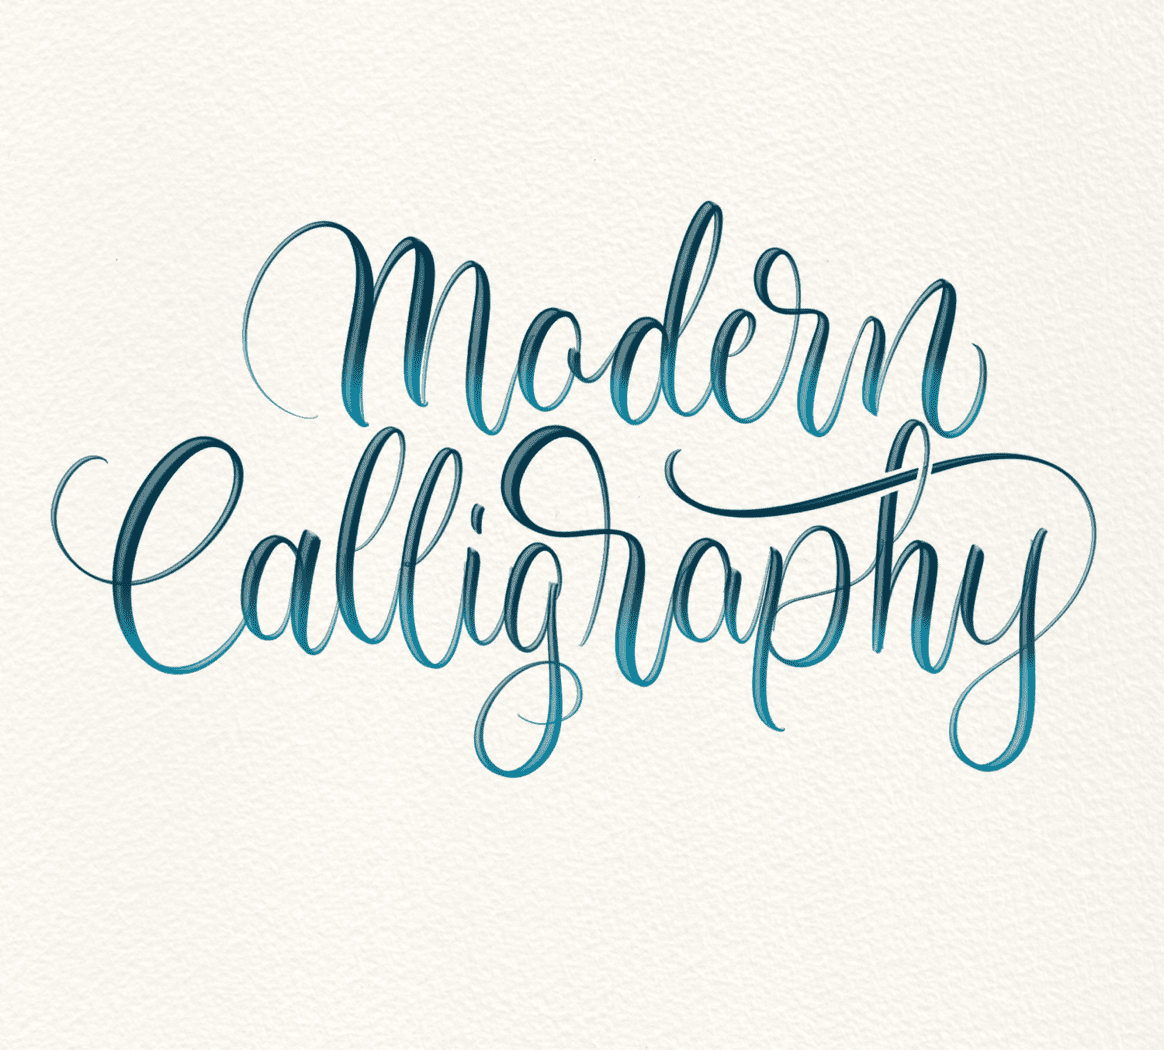 Free Letter Spacing Worksheets for Modern Calligraphy practice - Modern  Calligraphy Kits and Classes, Calligraphy Inks